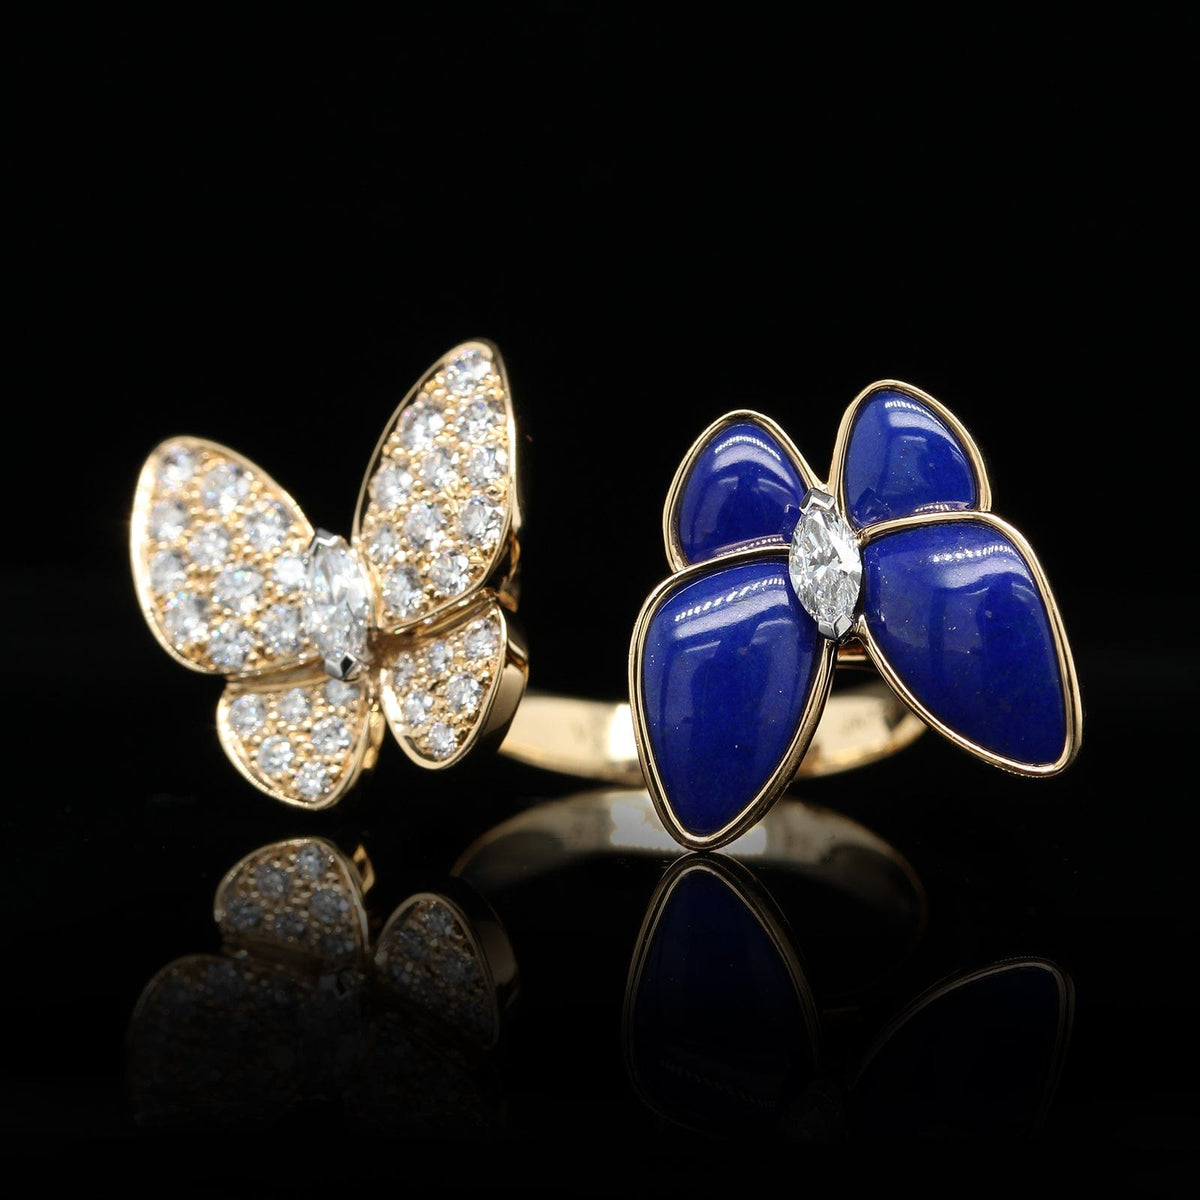 Van Cleef & Arpels 18K Yellow Gold Estate 'Two Butterfly' Diamond